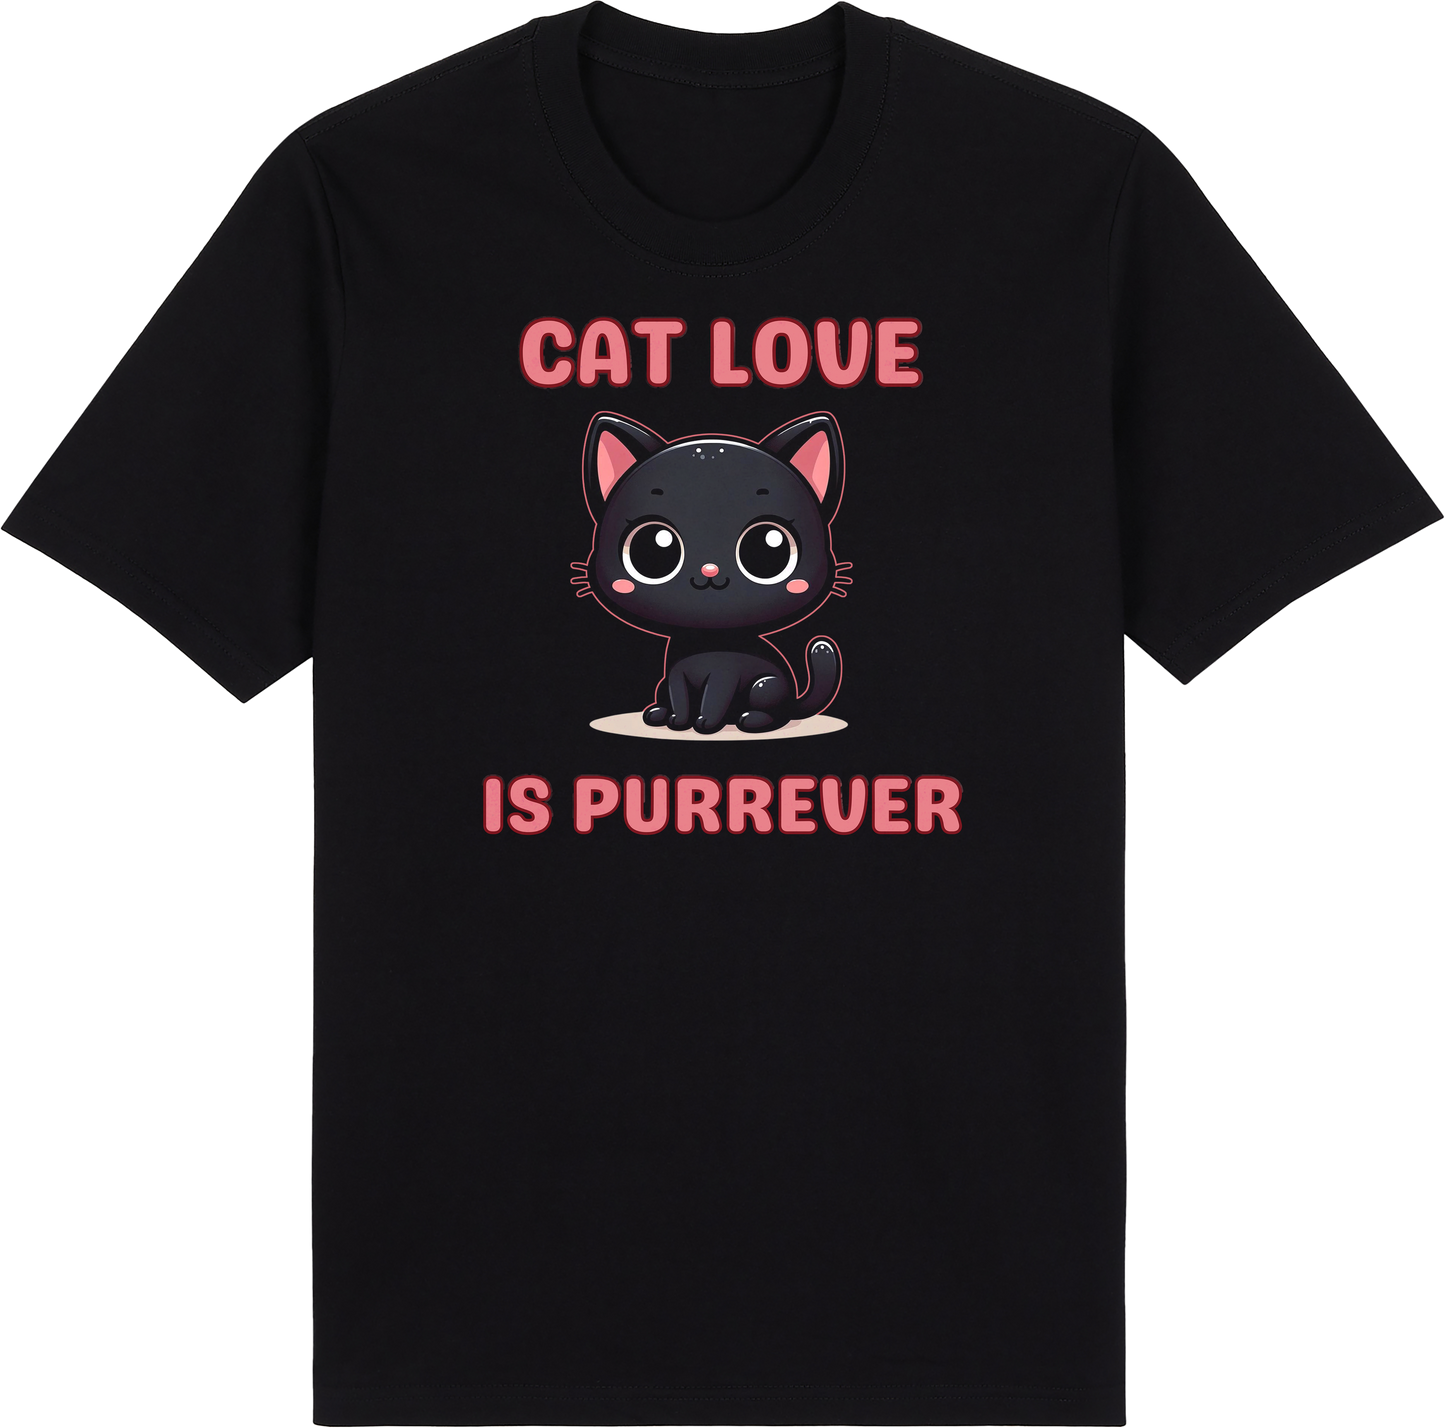 Cat Love is Purr-ever